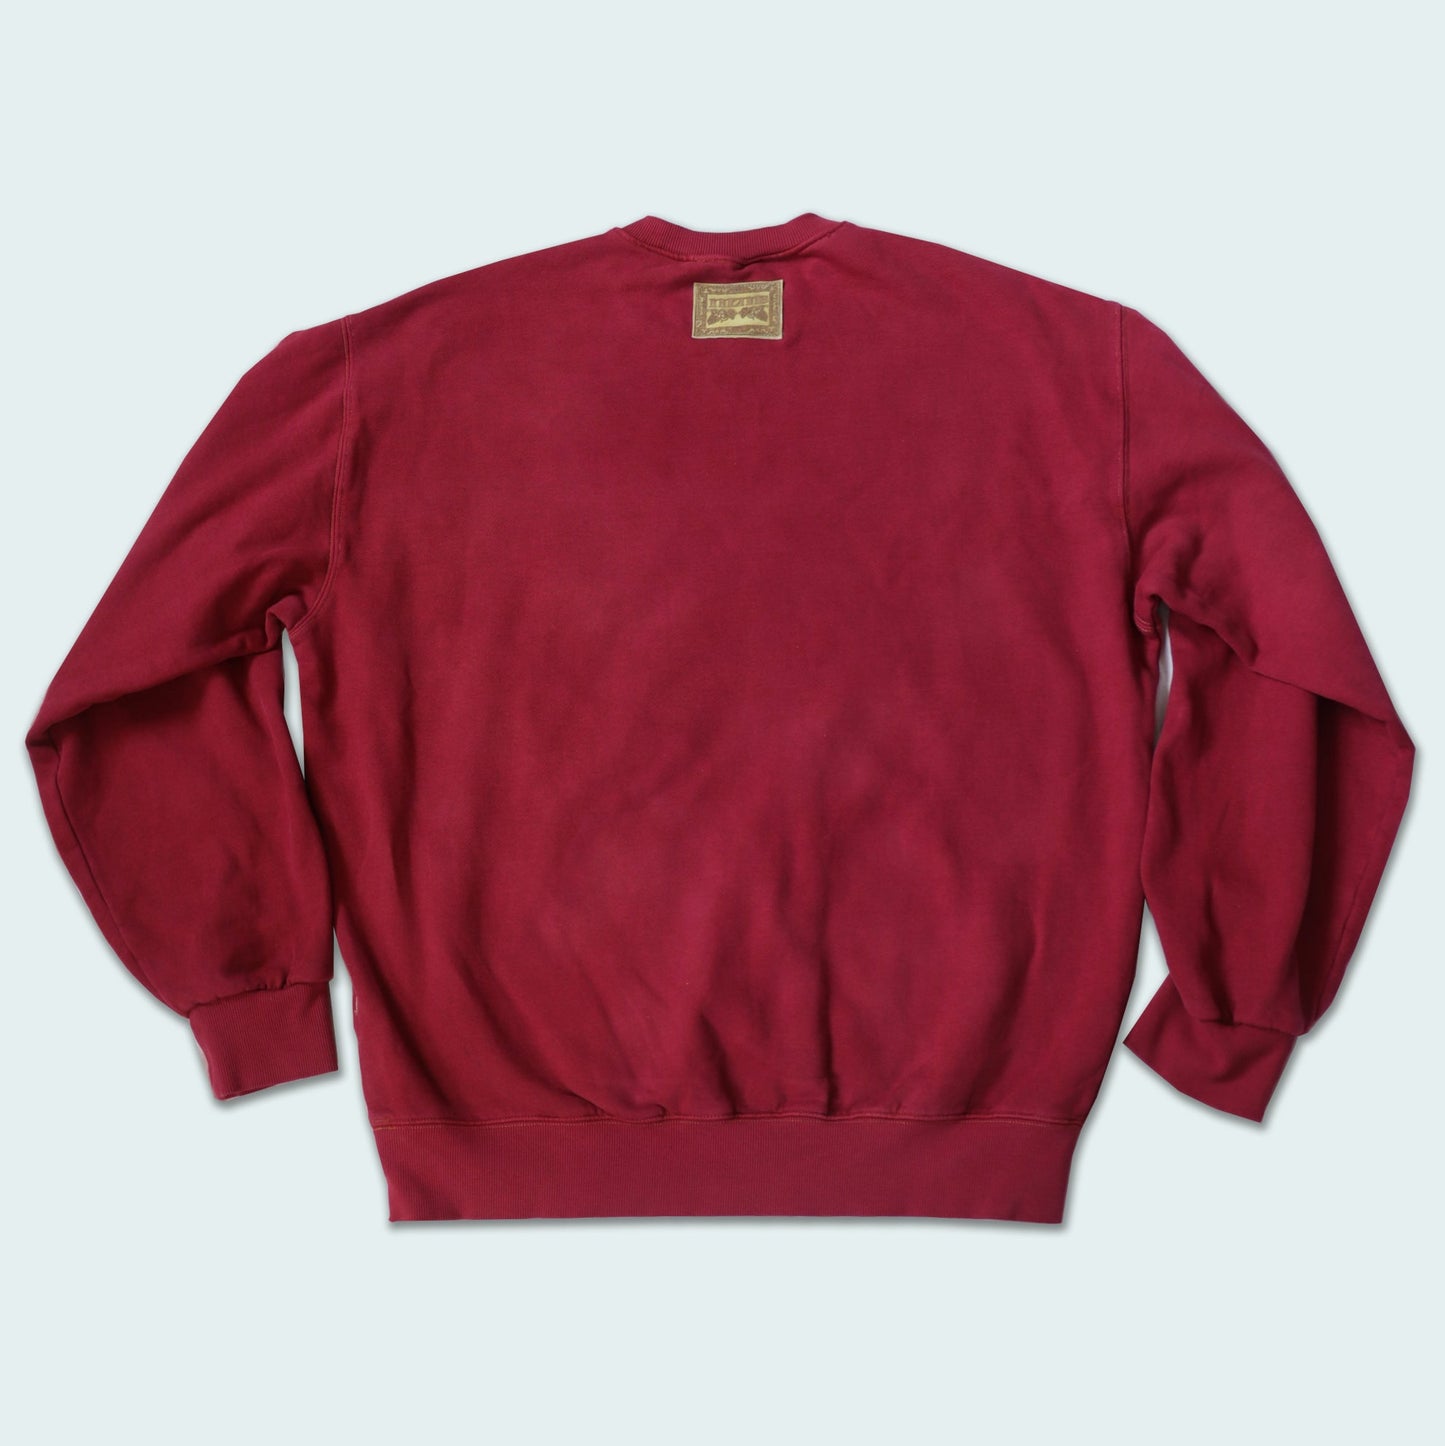 "WHAT DO YOU SEE?" CREW NECK - POMEGRANATE